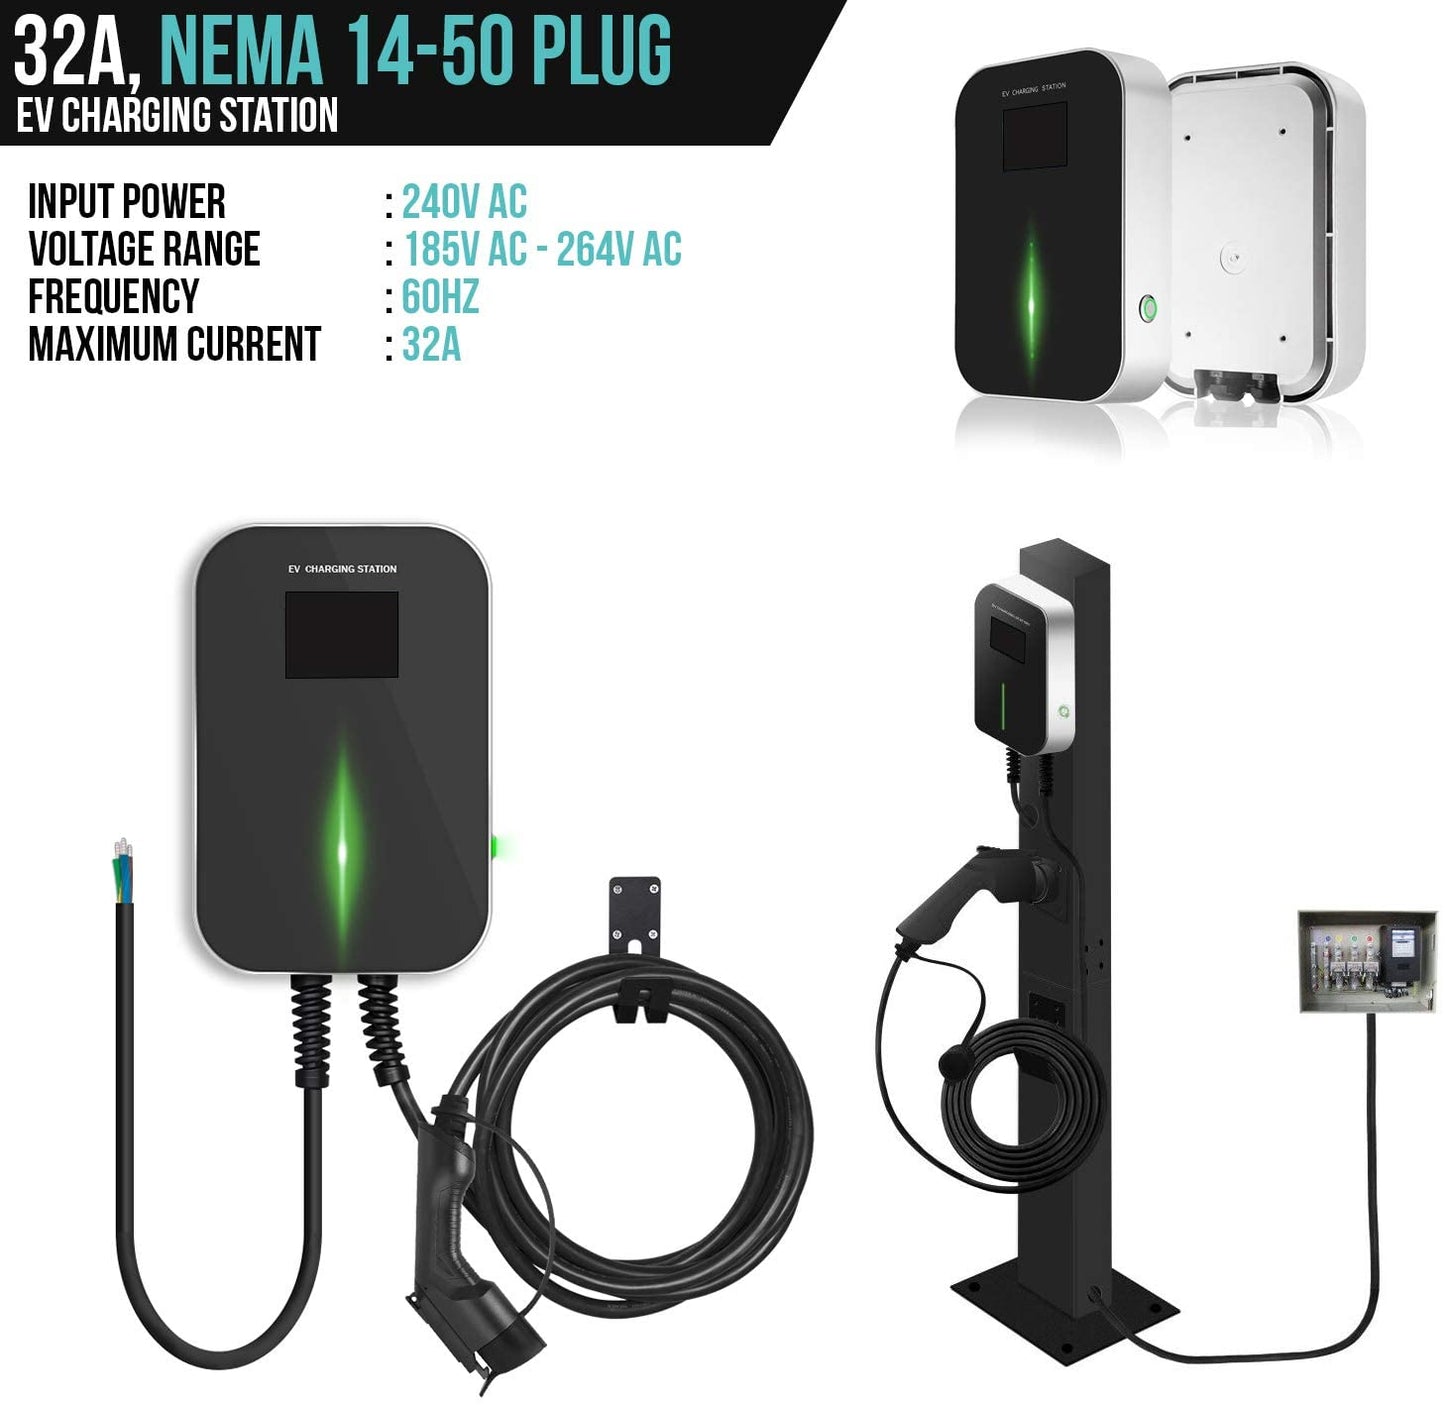 Lectron 240V 32 Amp Level 2 Electric Vehicle (EV) Charging Station with 20ft/6m J1772 Cable & NEMA 14-50 Plug - EVSE 7.68kW Compatible with All SAE J1772 Electric Vehicles